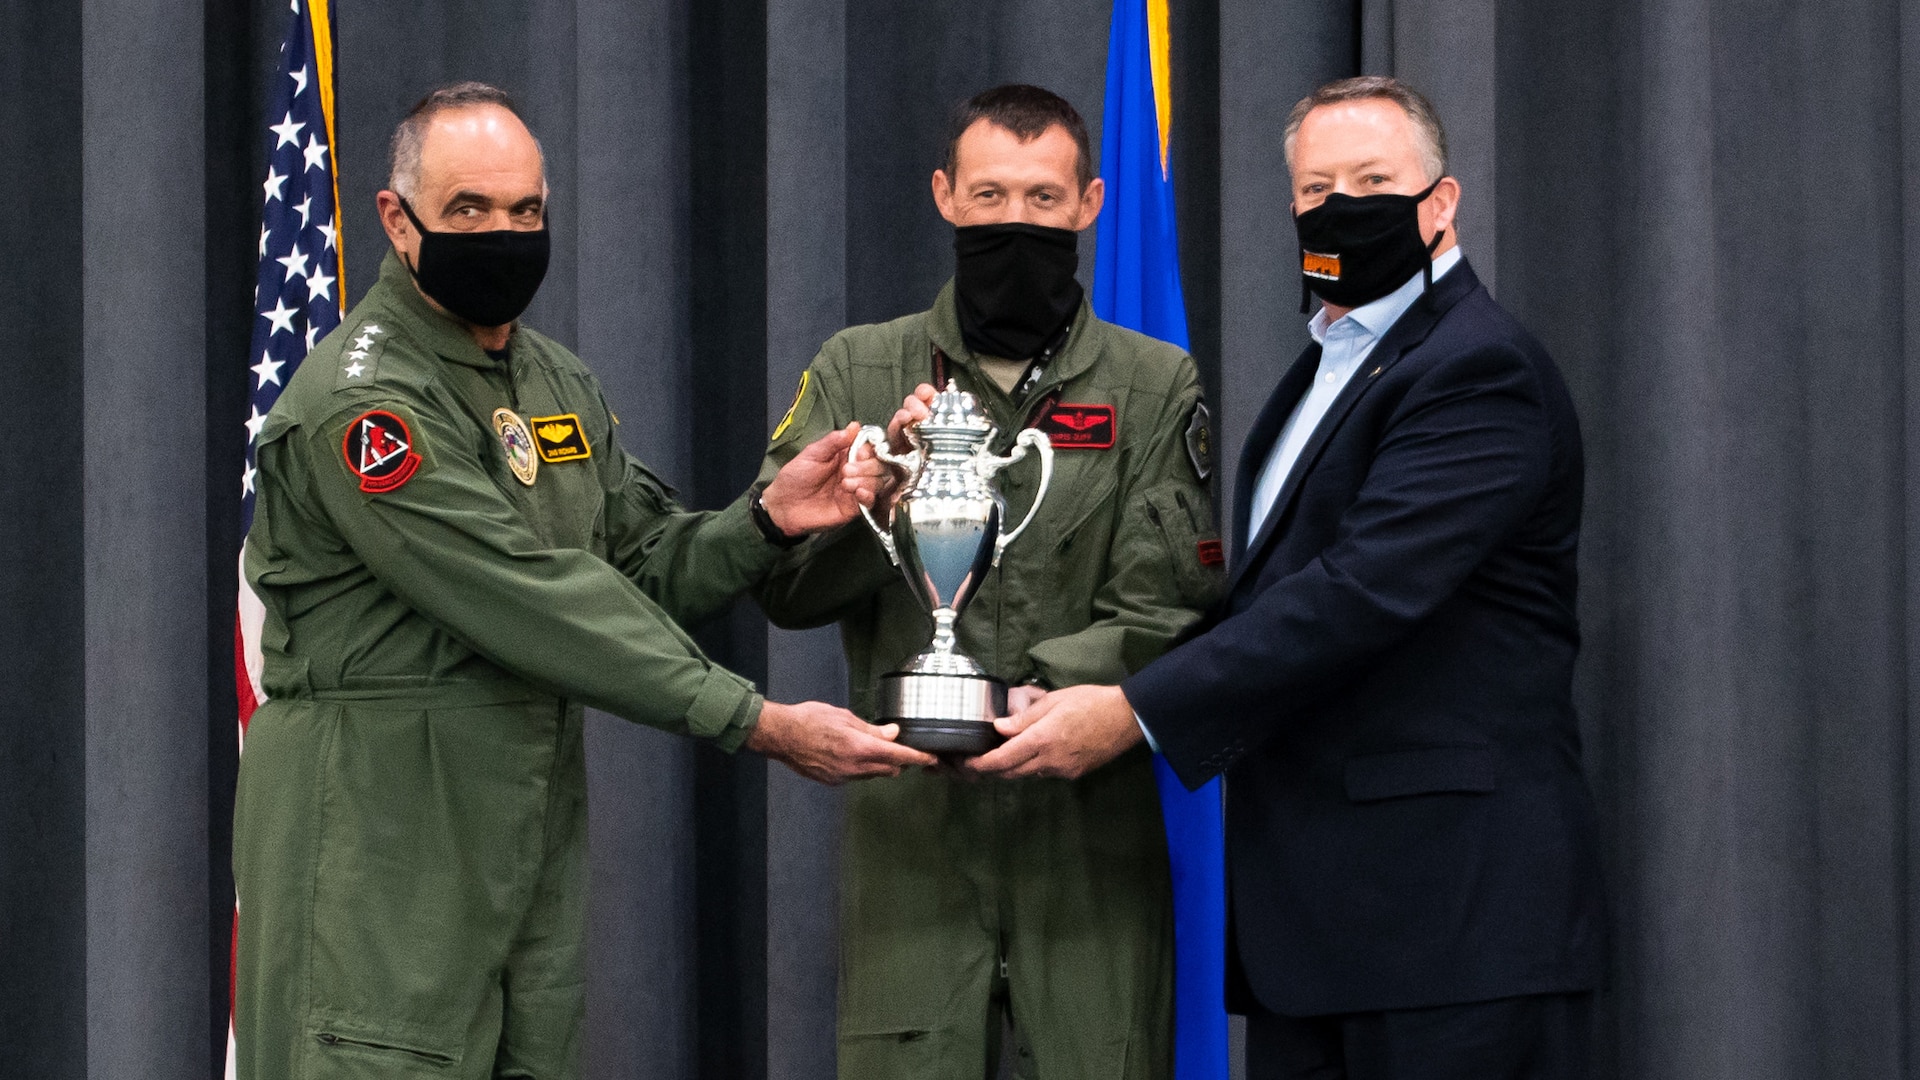 (Left to right) Adm. Charles Richard, U.S. Strategic Command commander, Lt. Col. Christopher Duff, 96th Bomb Squadron commander, and Mr. Tim Burke, Strategic Command Consultation Committee chairman, hold the Omaha Trophy during the presentation of the Omaha Trophy to the 96th BS at Barksdale Air Force Base, Louisiana, March 30, 2021. The 96th BS is the first bomb squadron to be presented the prestigious award. (U.S. Air Force photo by Airman 1st Class Jacob B. Wrightsman)